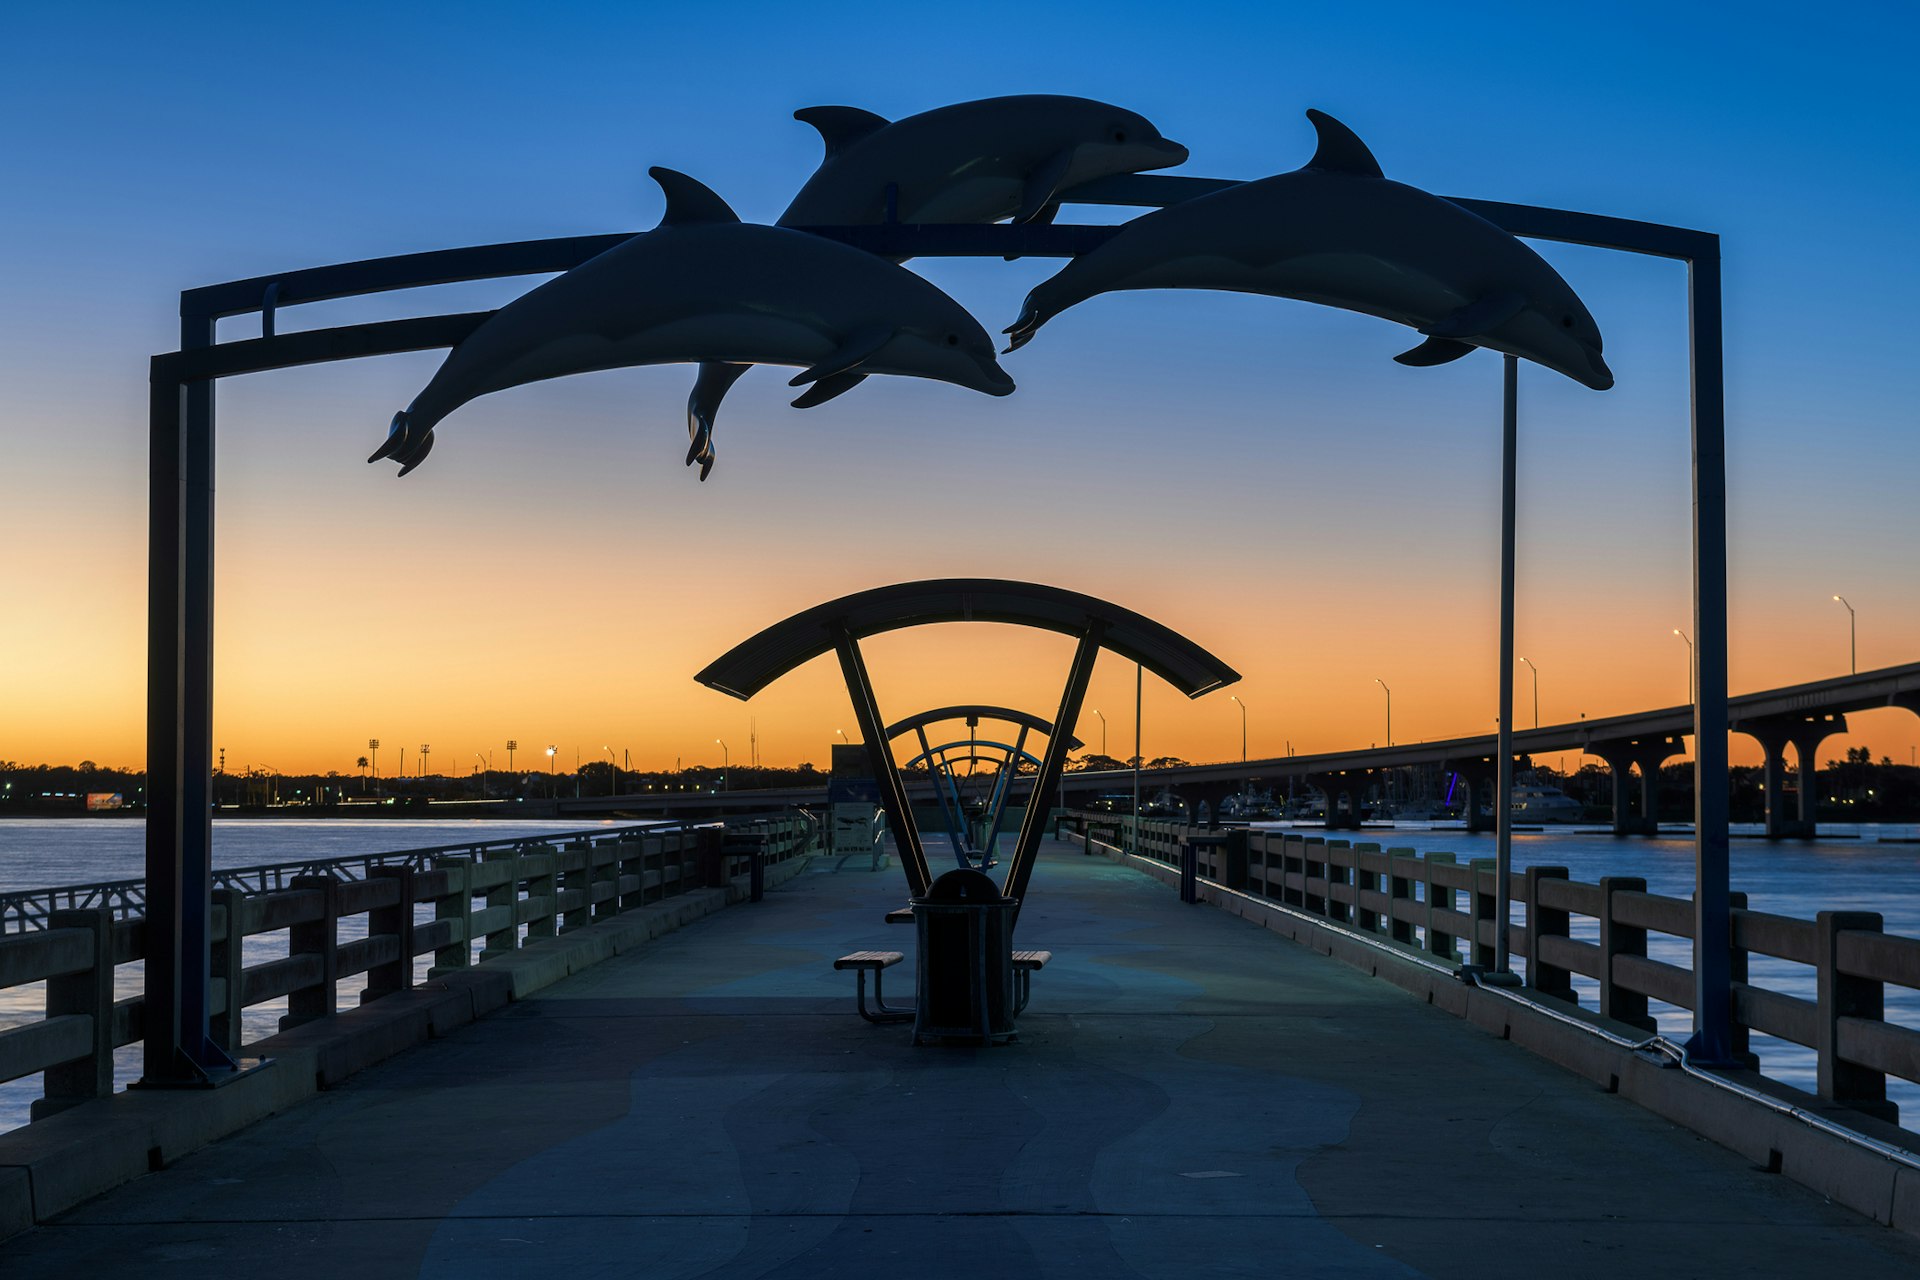 A retro pier with dolphin-shaped decorations in silhouette as the sun sets casting orange and blue light in the sky